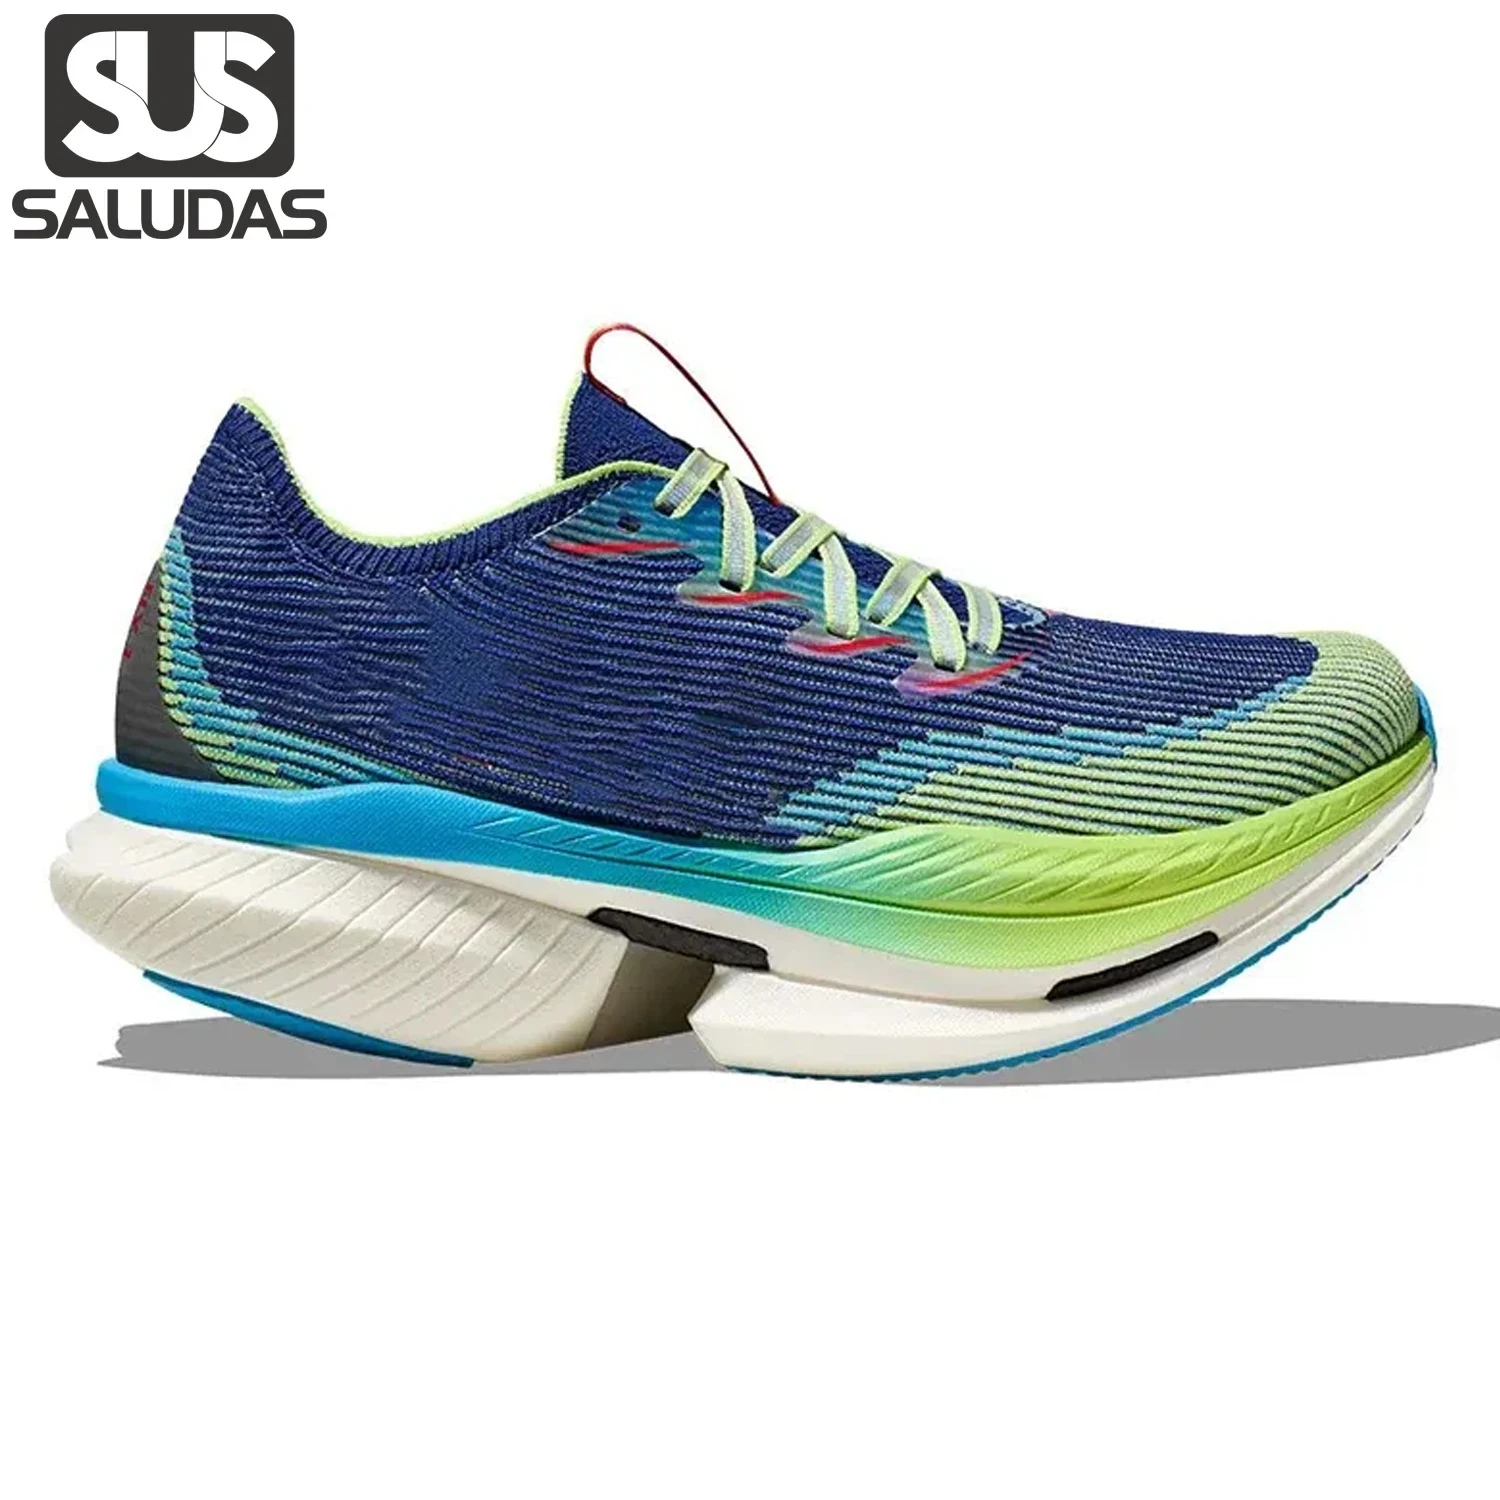 

SALUDAS Original Carbon Plate Running Shoes Men Women Cushioning Marathon Running Shoes Thick Sole Outdoor Road Jogging Sneakers